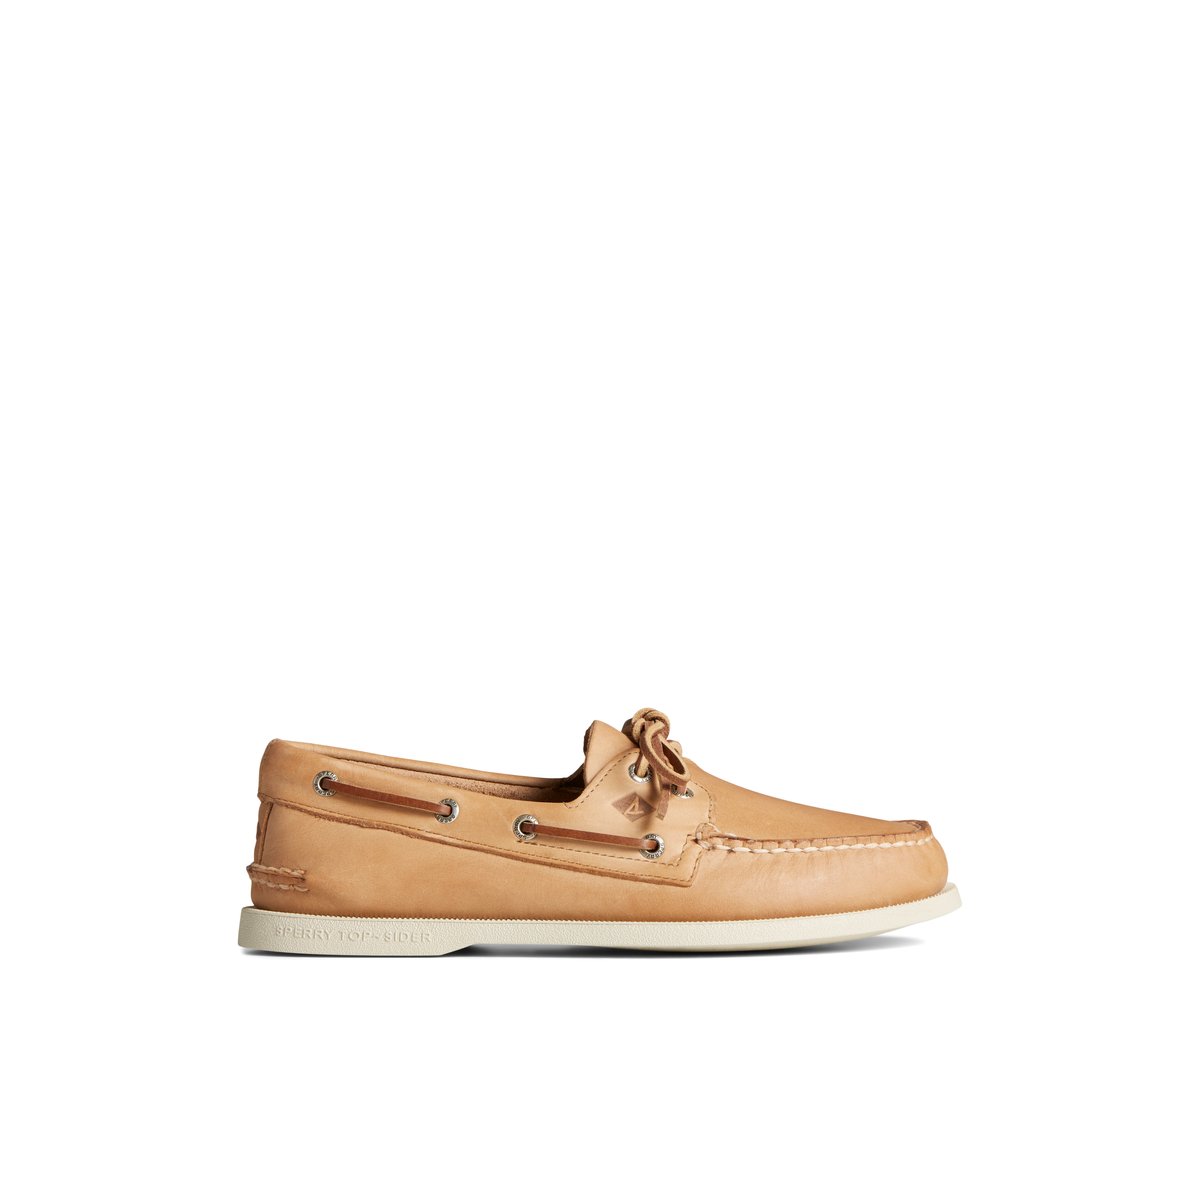 Introduction to Sperry Top-Sider